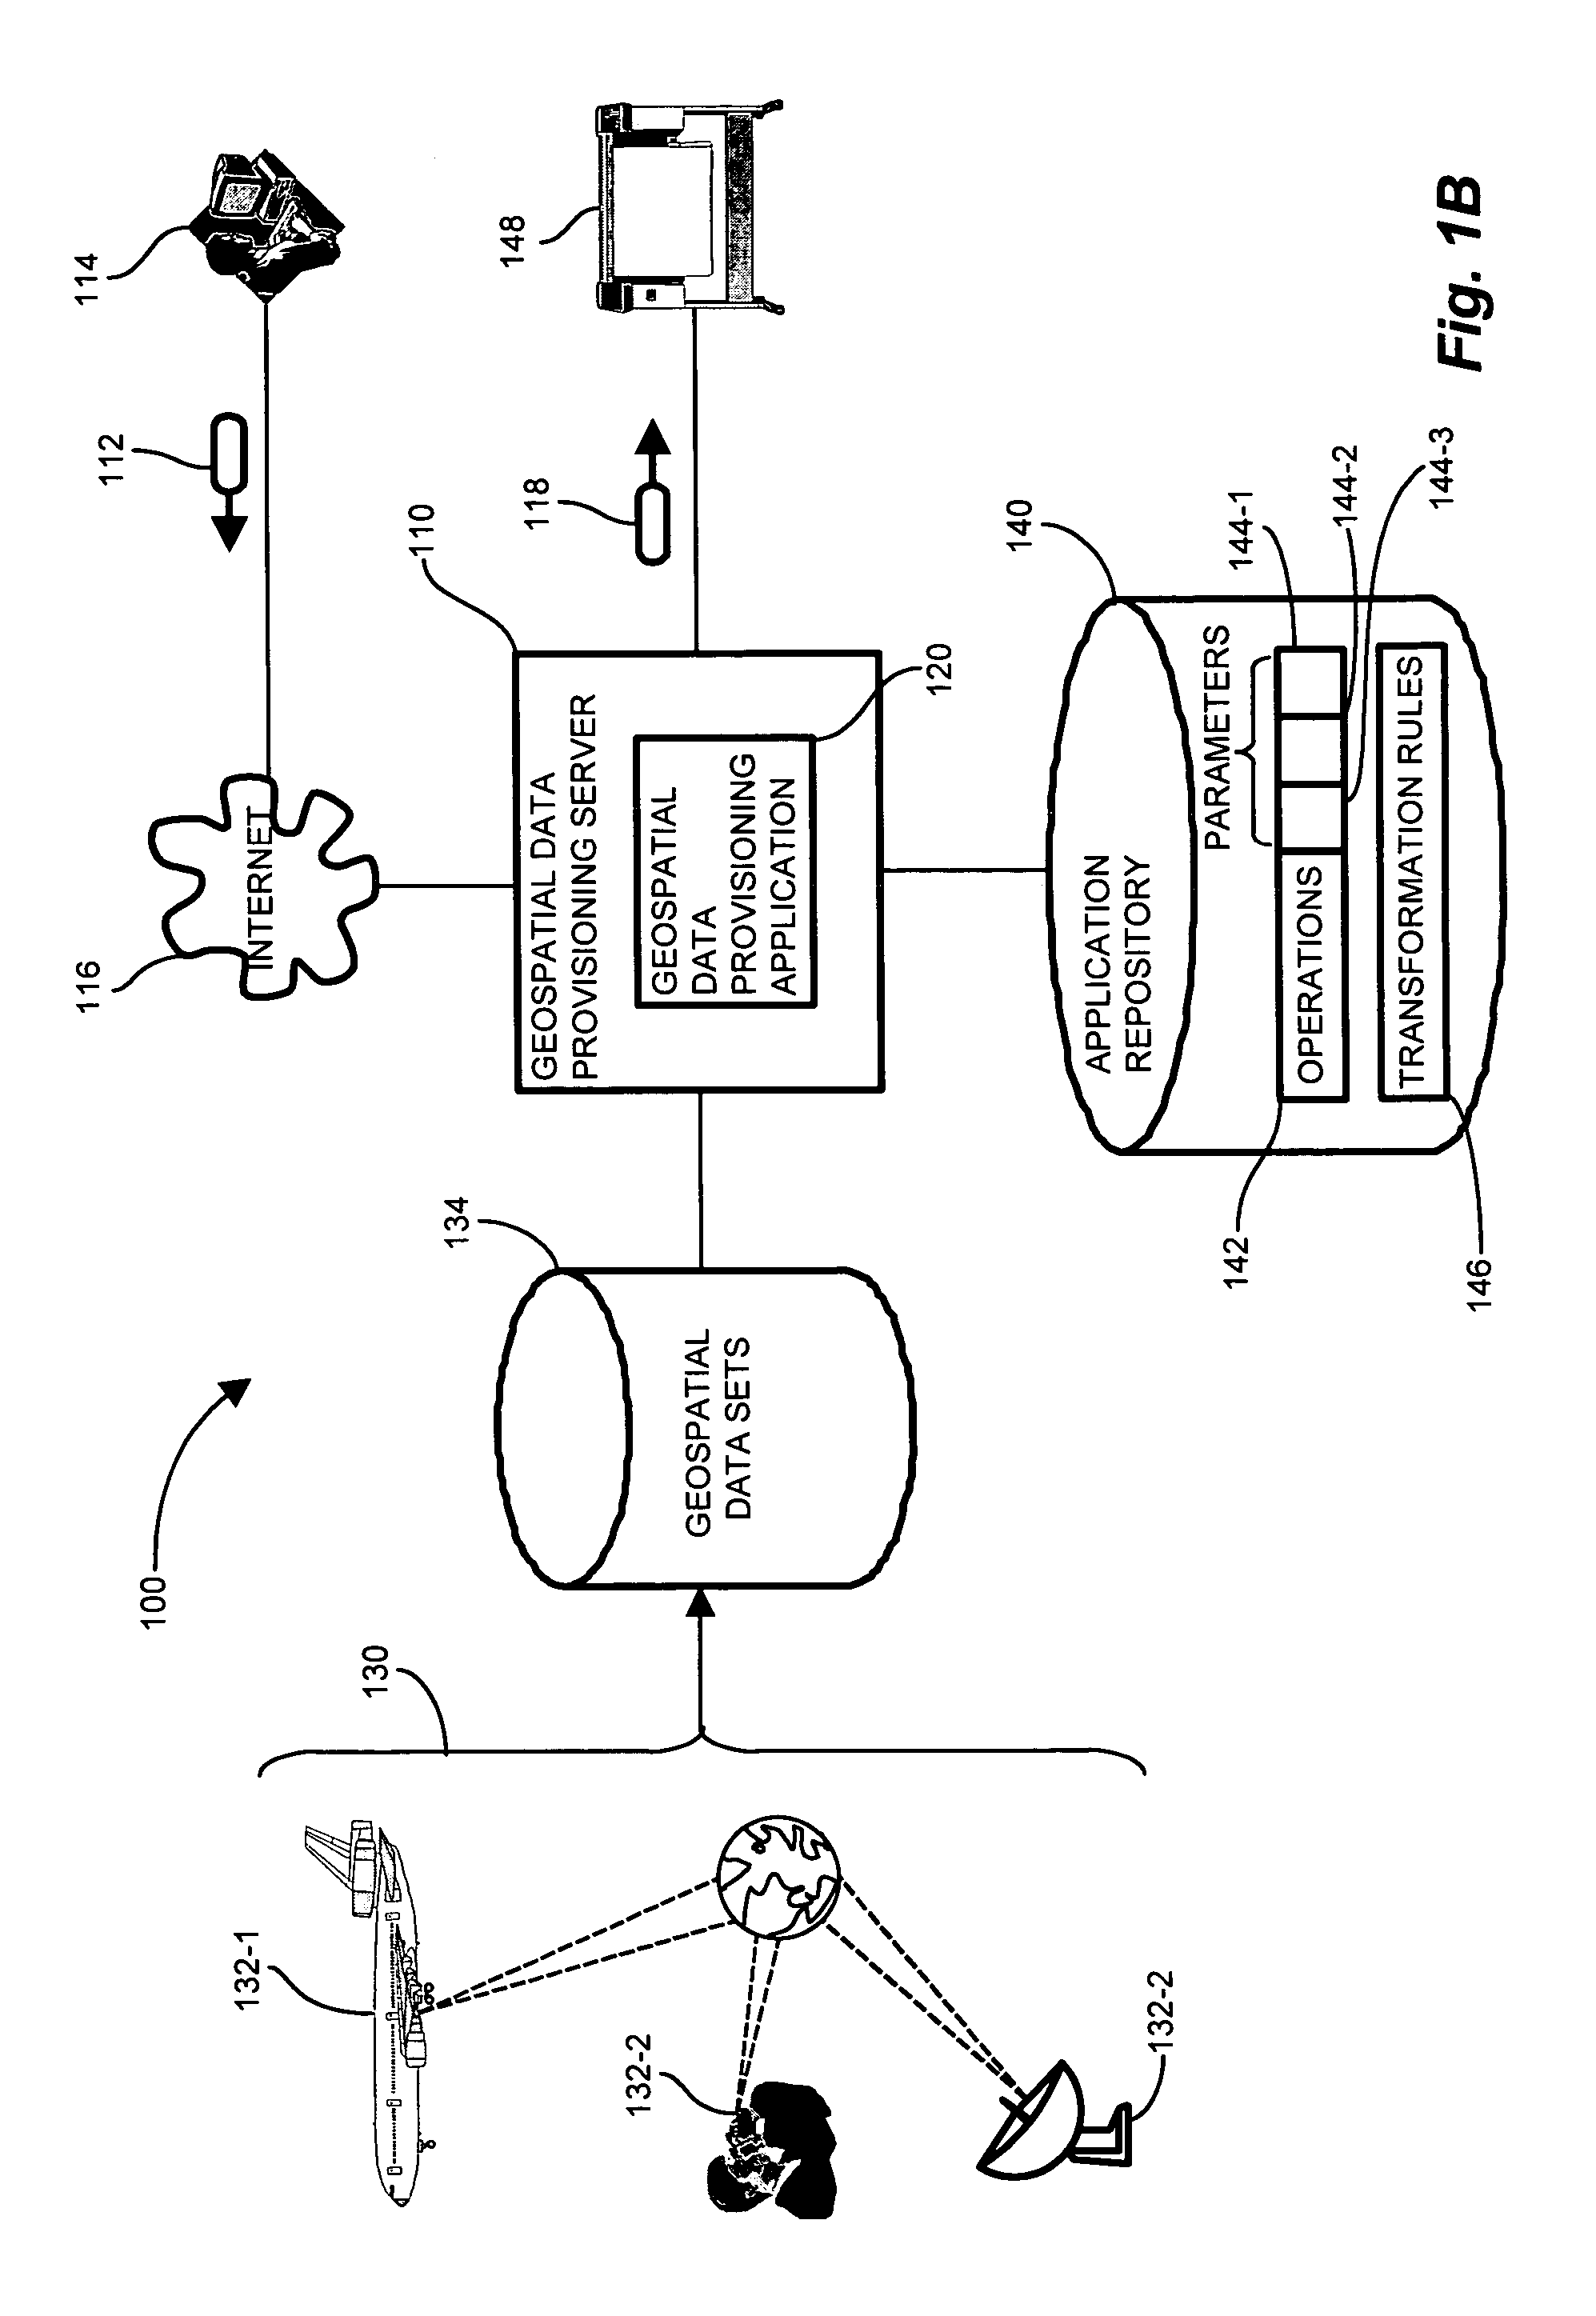 System and methods for provisioning geospatial data